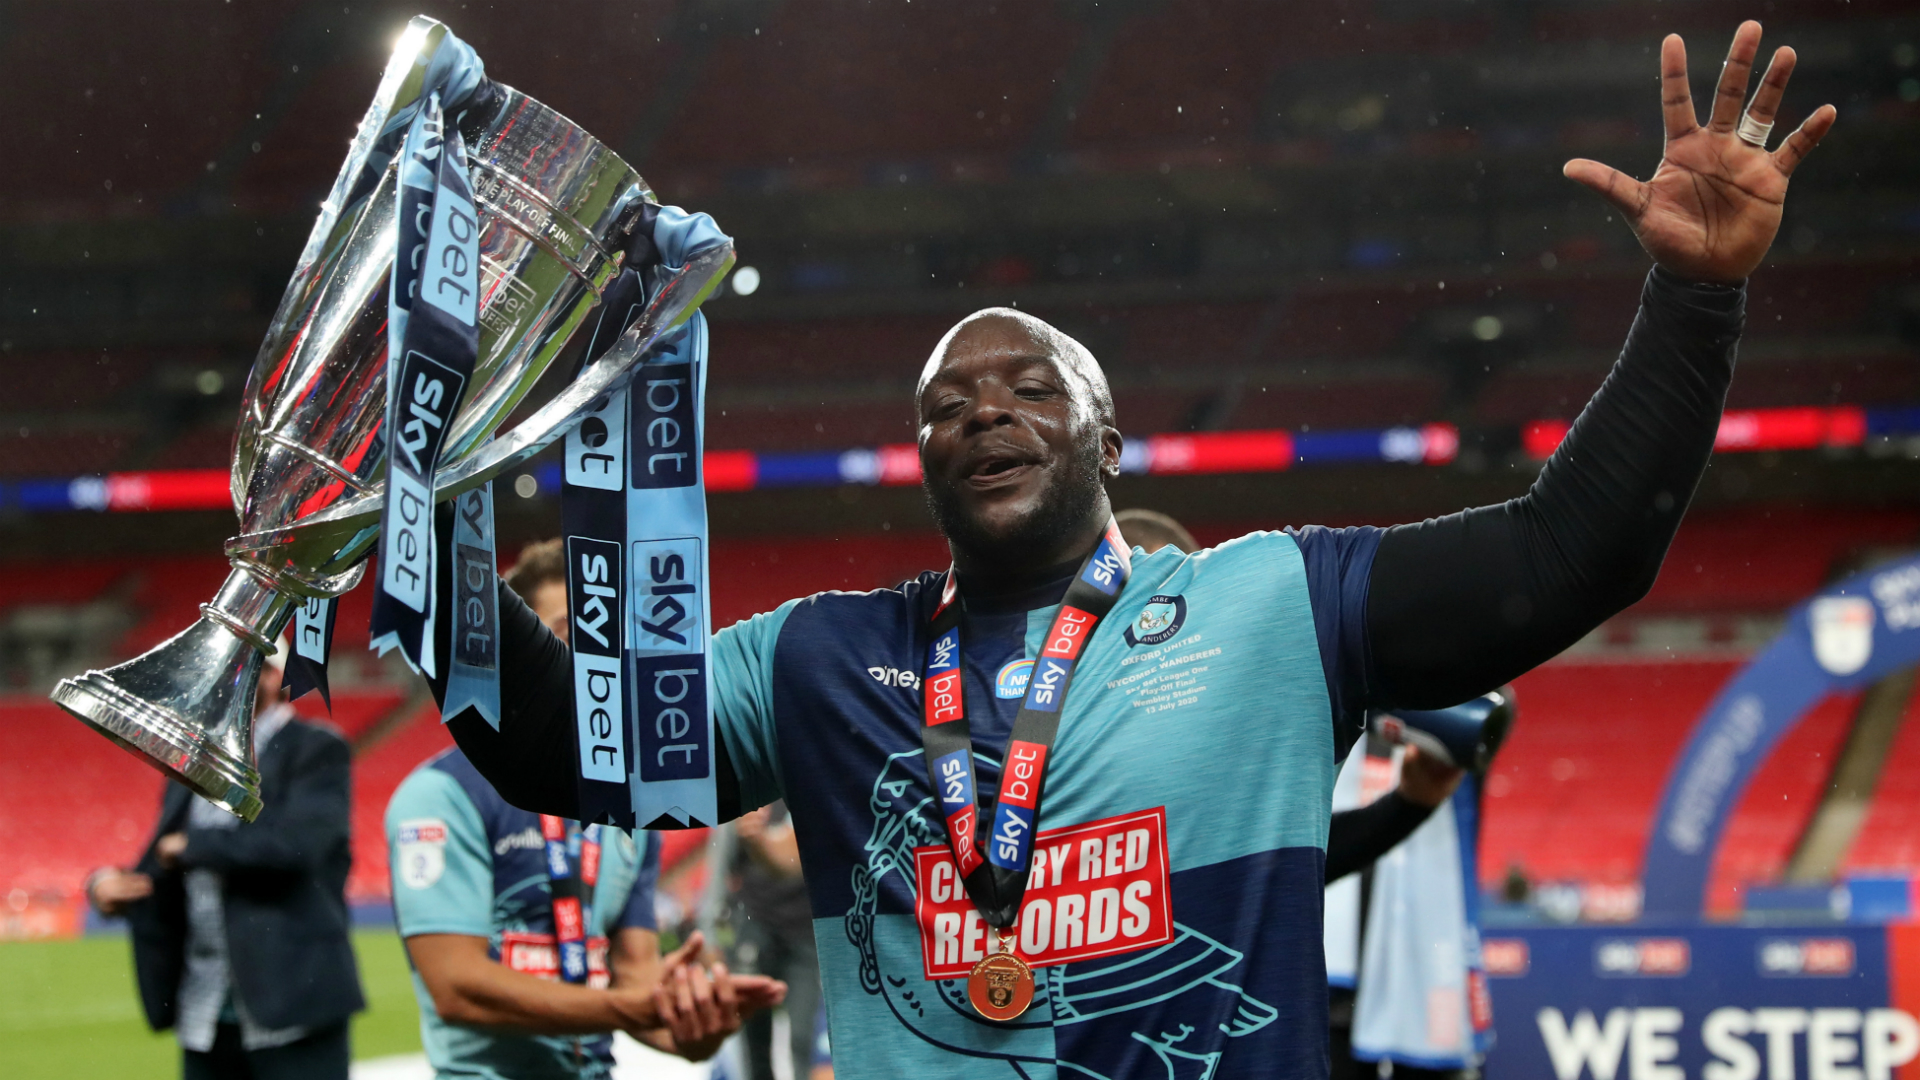 Wycombe striker Adebayo Akinfenwa, 38, revelled in Monday's memorable achievement and Jurgen Klopp joined the party.